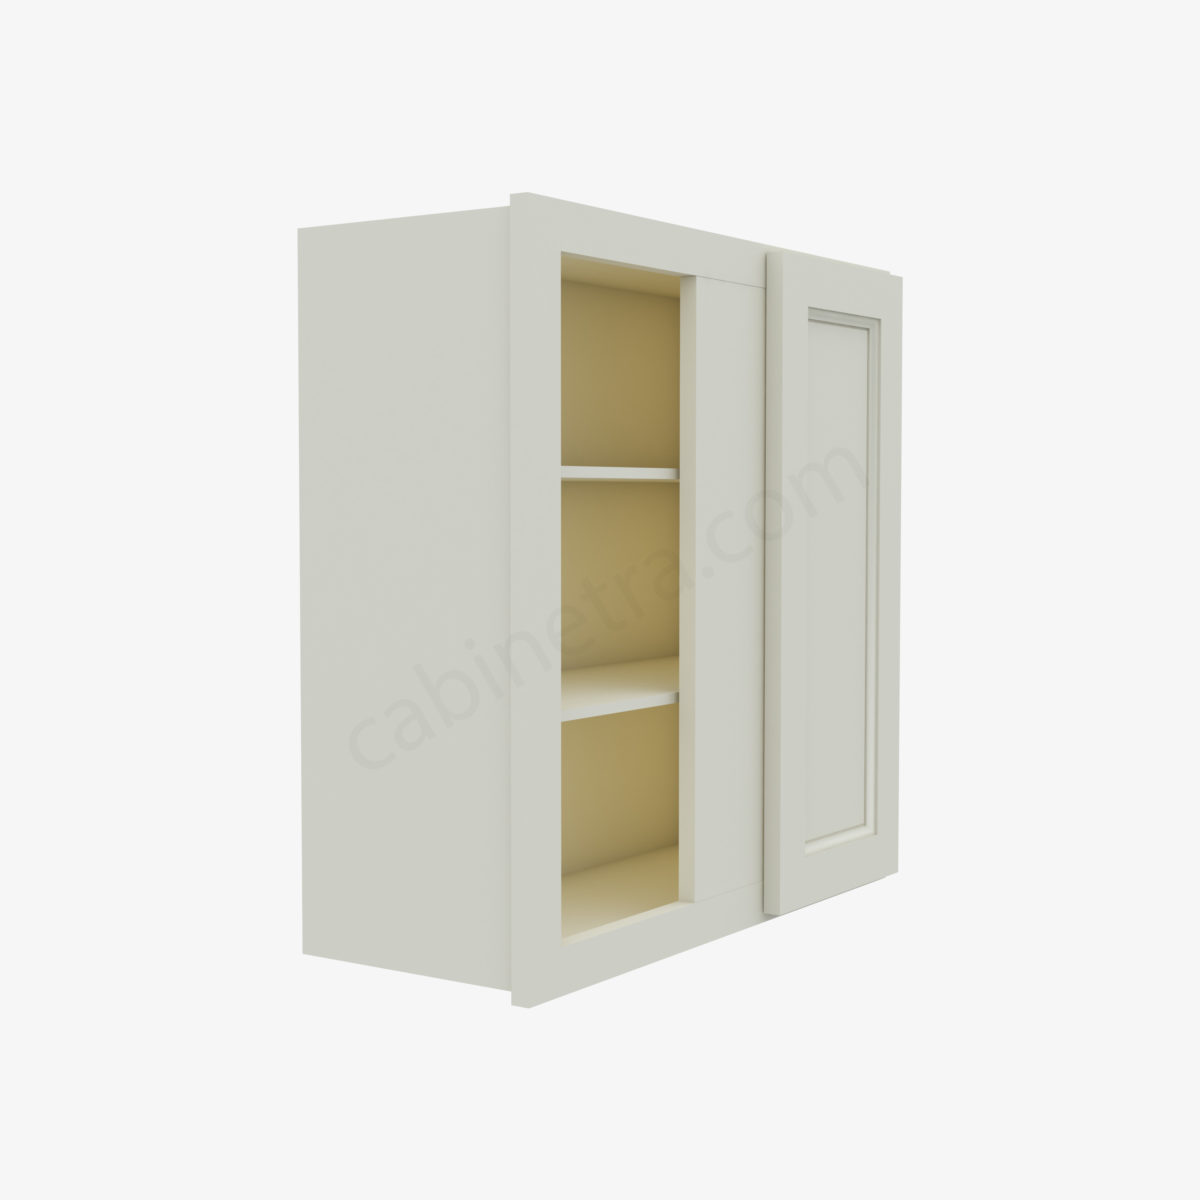 TQ WBLC30 33 3030 4 Forevermark Townplace Crema Cabinetra scaled